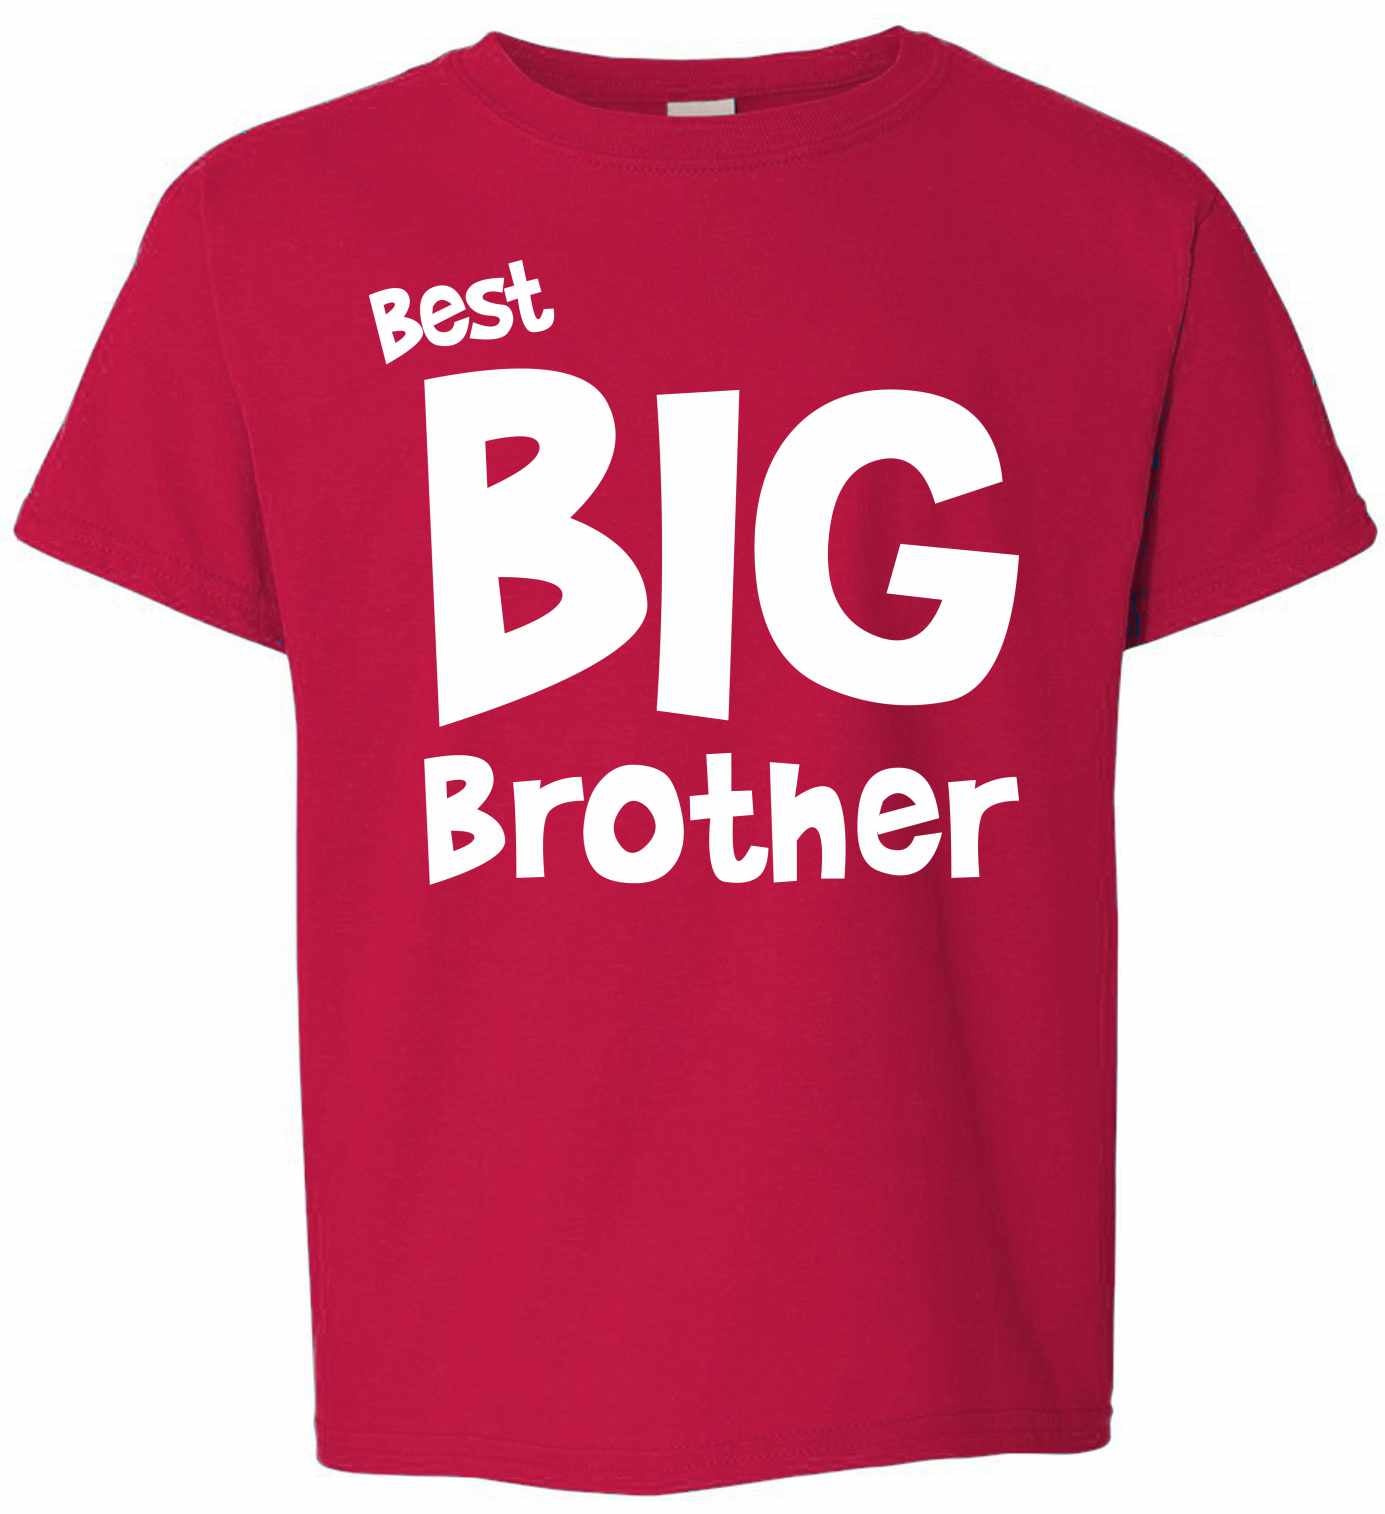 Best Big Brother on Youth T-Shirt